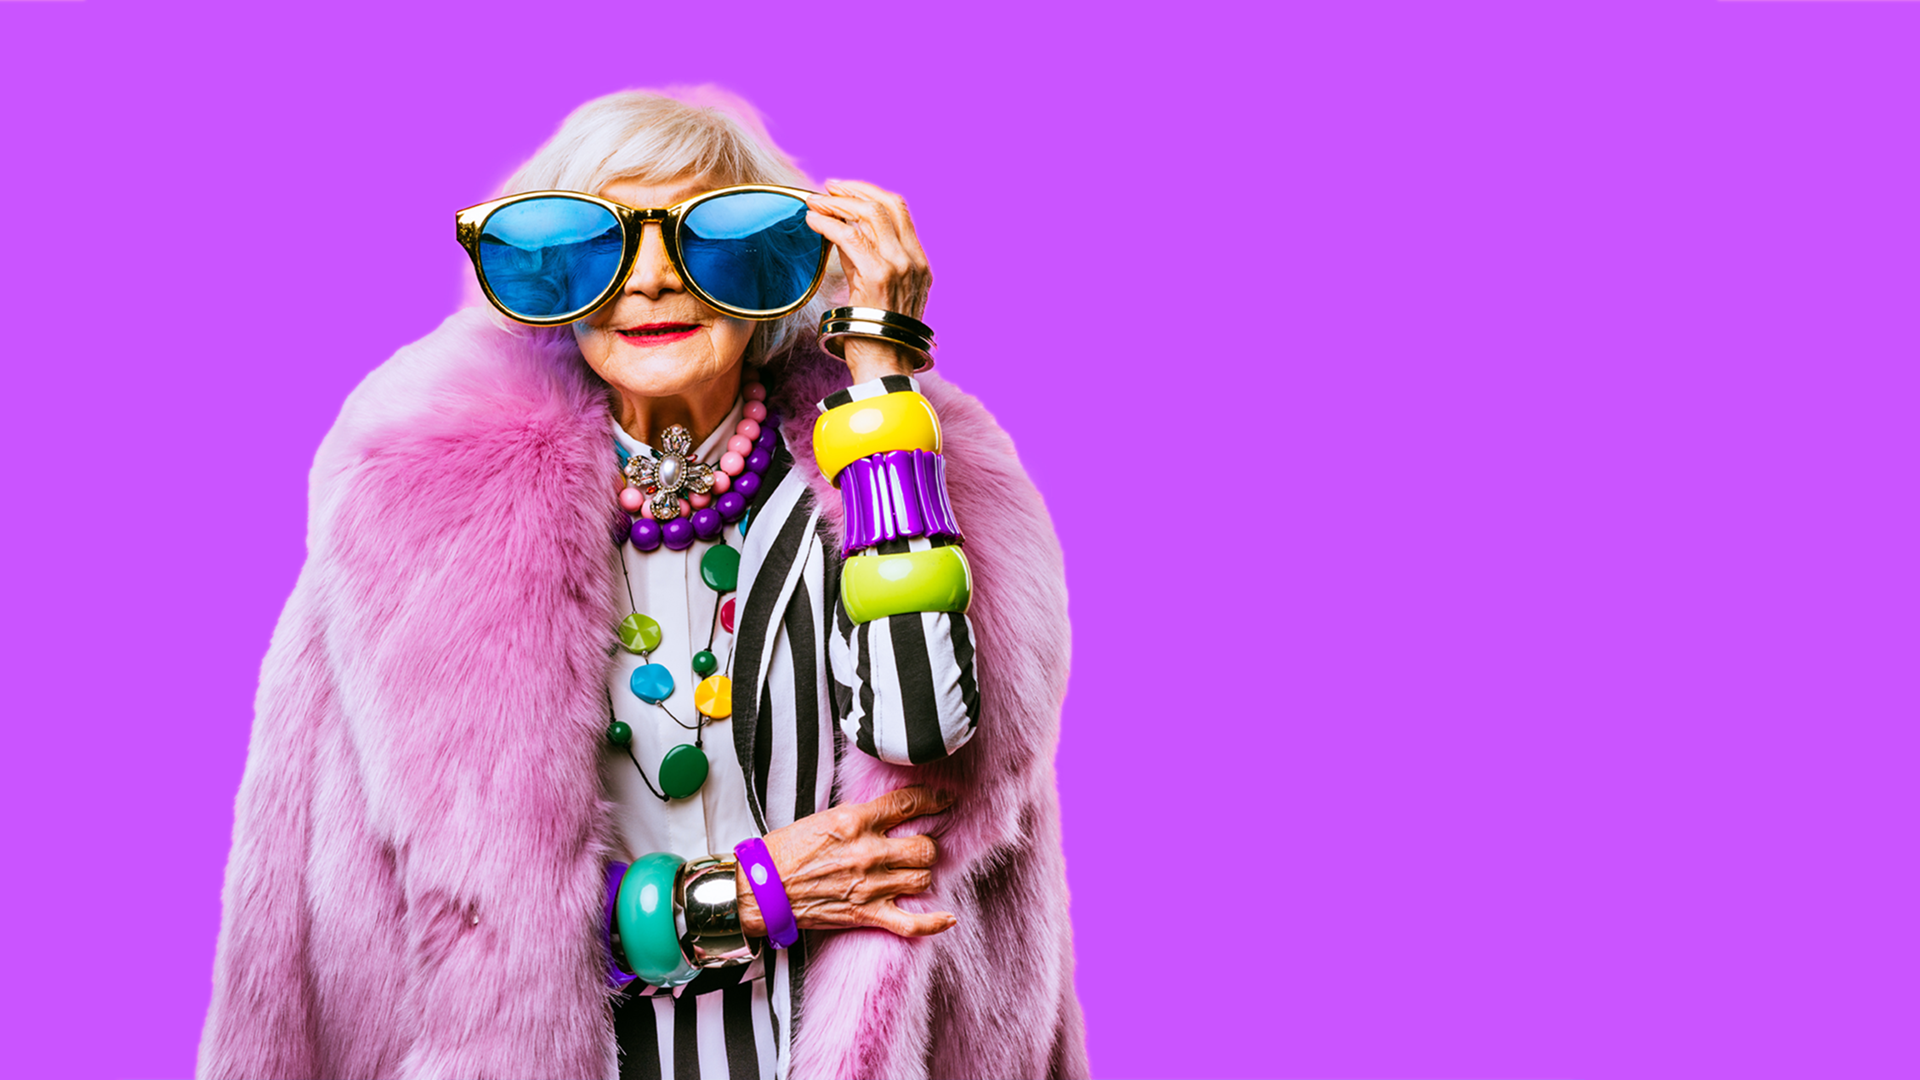 An elderly woman wearing ridiculously oversized sunglasses, extravagant jewellery and a pink fur coat poses confidently